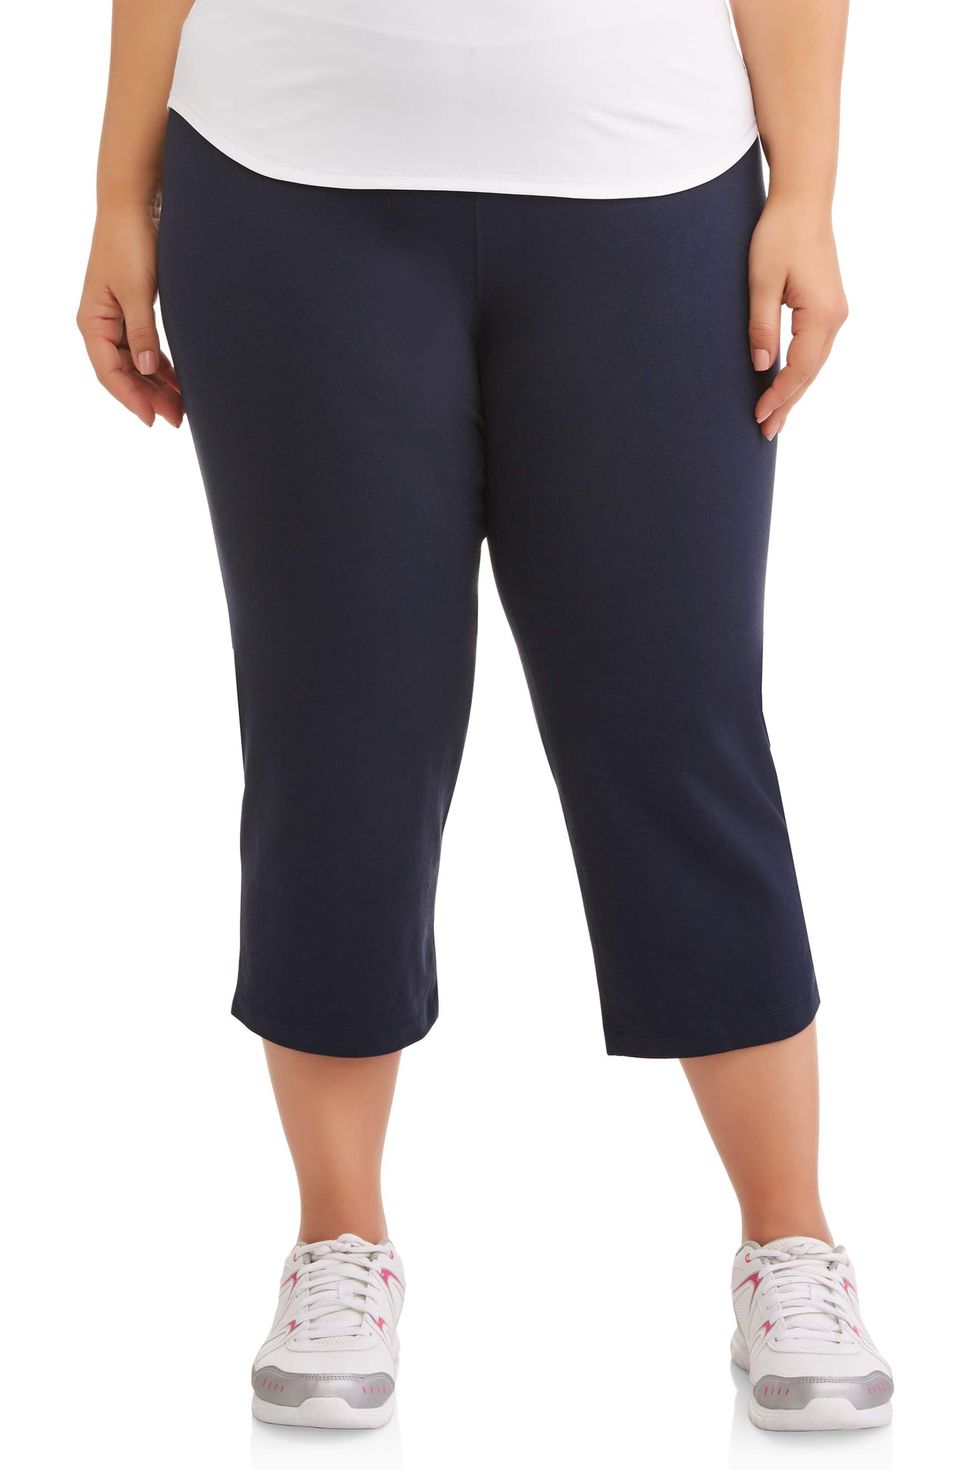 Athletic Works Women's Dri-More Active Leggings | Moisture-Wicking Mid Rise  Fitness Pants